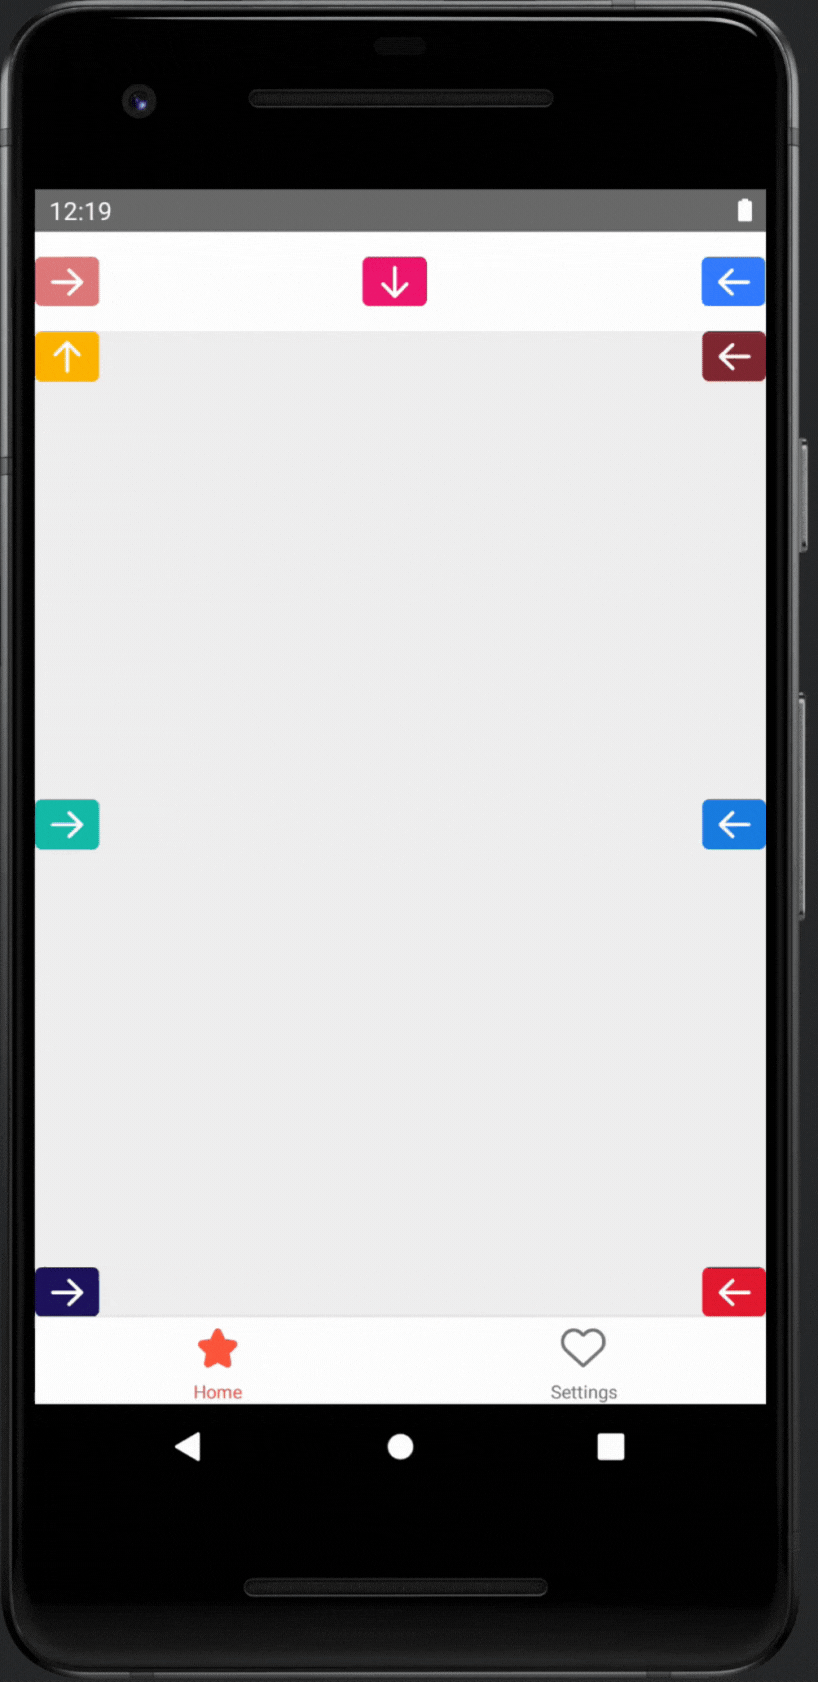 android.gif